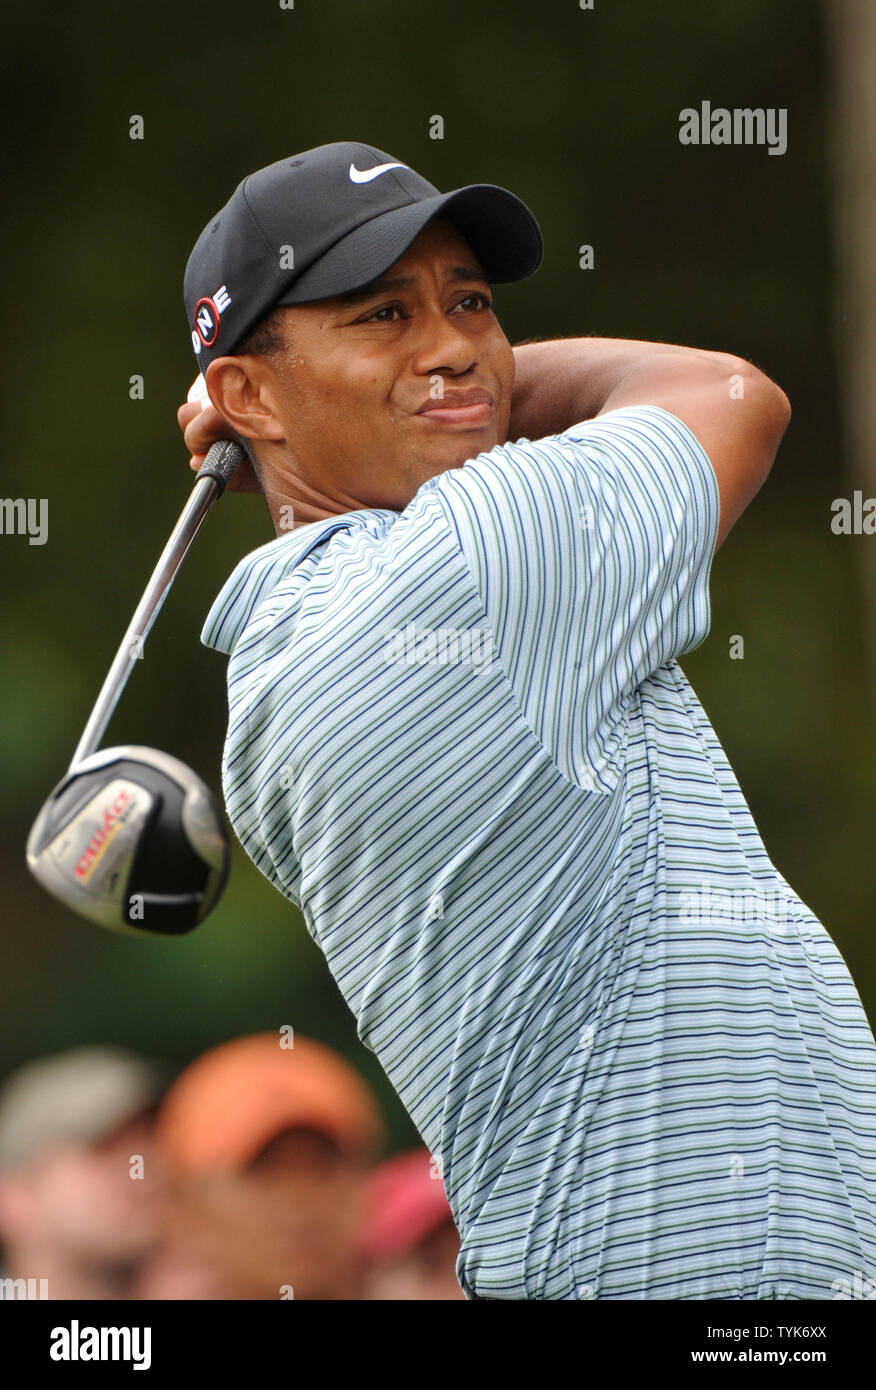 Tiger Woods watches his drive off of the 12th tee box during the second round of the U.S. Open at Bethpage Black in Farmingdale, New York on June 20, 2009. (UPI Photo/Kevin Dietsch) Stock Photo